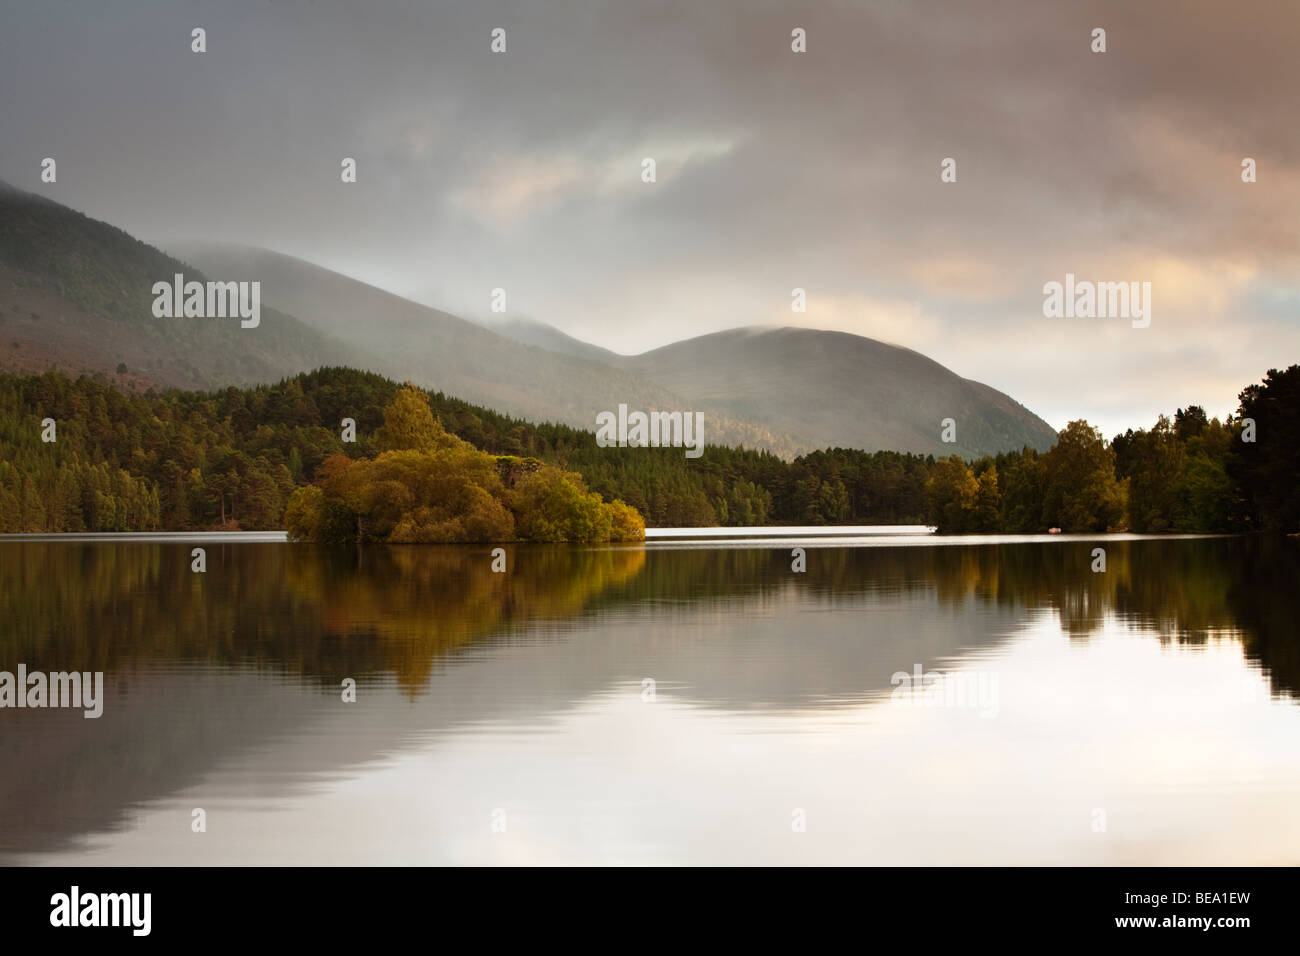 Sunset over Loch an Eilein and castle island, Cairngorms National Park, Scottish Highlands, Uk Stock Photo